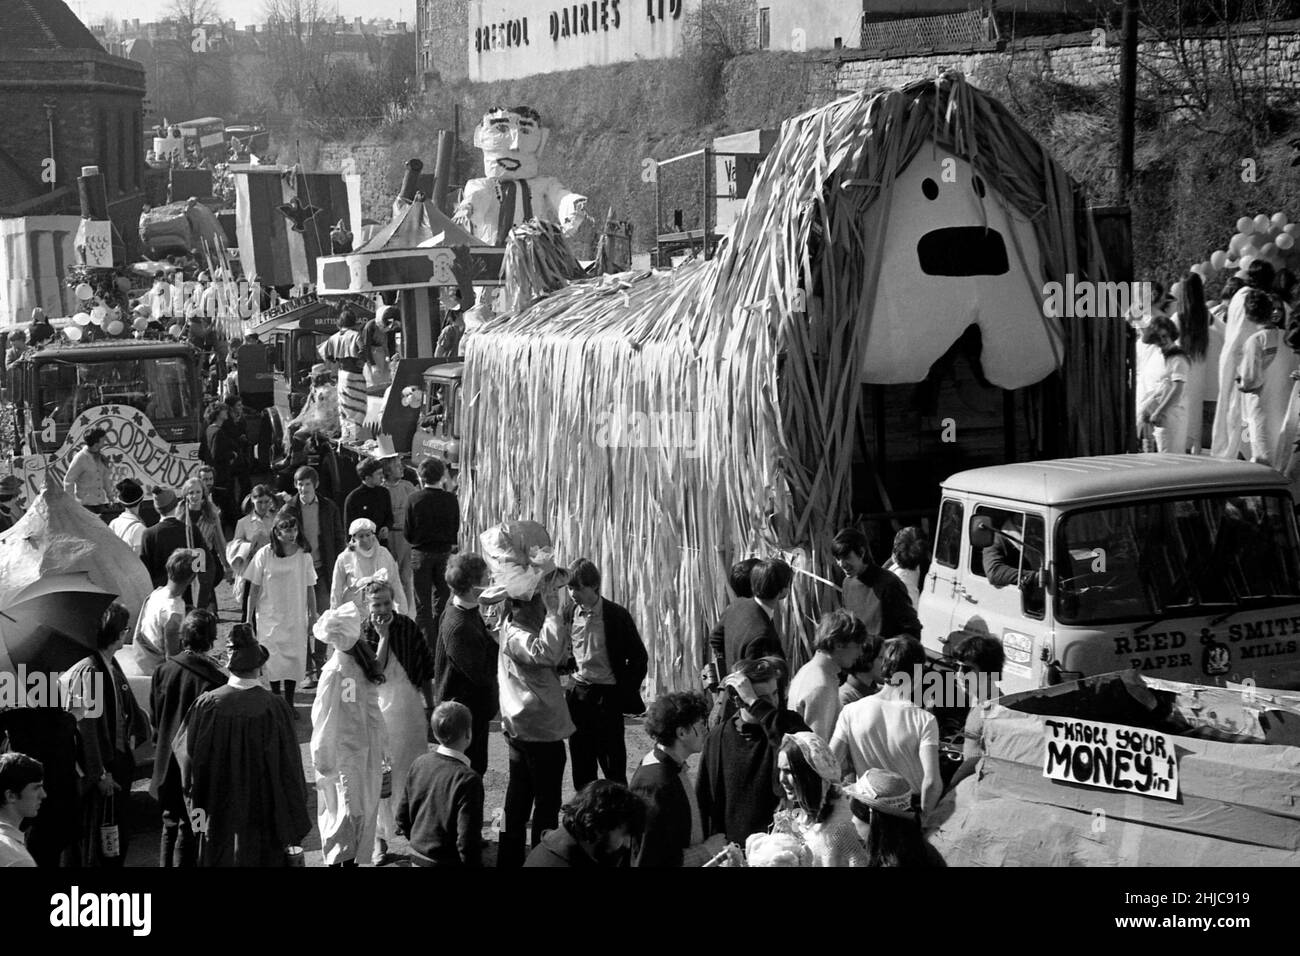 The start of Bristol University’s 1969 Rag Procession from Clifton Down station car park.  The entry depicting Dougal, the popular dog in 60s children tv series The Magic Roundabout, went on to win best float for students from Burwalls hall of residence.  The parade of floats started at 2.30 pm on 8 March and wound its way past the Victoria Rooms and the Wills building on down Park Street round to Baldwin Street then through Broadmead before returning along Lower and Upper Maudlin Street and Park Row.  Thousands of spectators lined the streets and thousands of pounds were raised for charity. Stock Photo